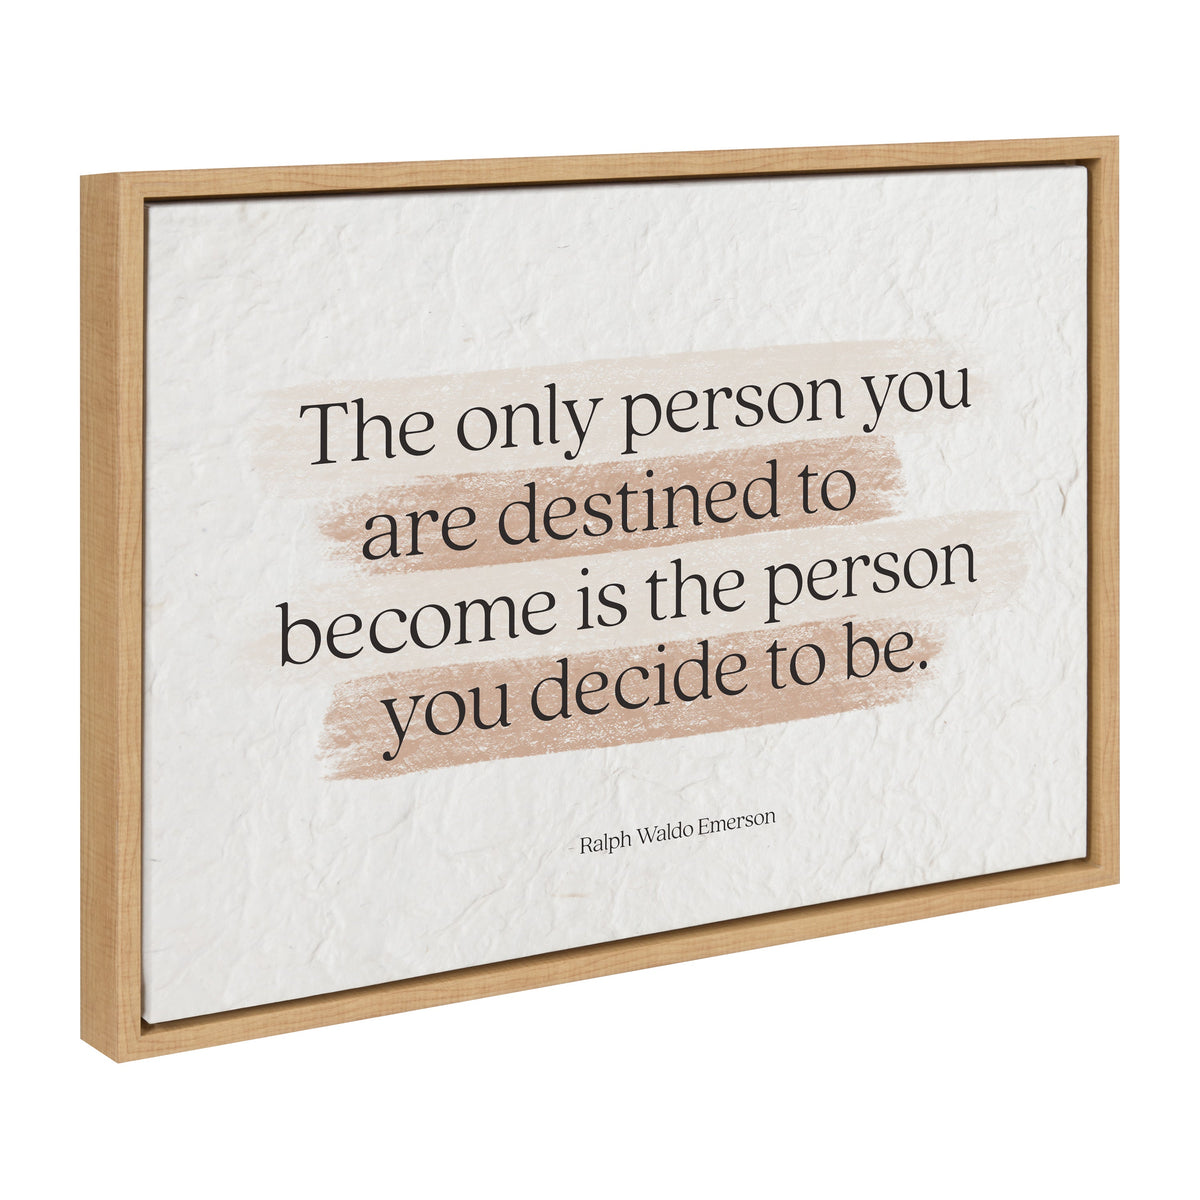 The only person you are destined to become is the person you decide to be  - Ralph Waldo Emerson / 24x18 Framed Canvas